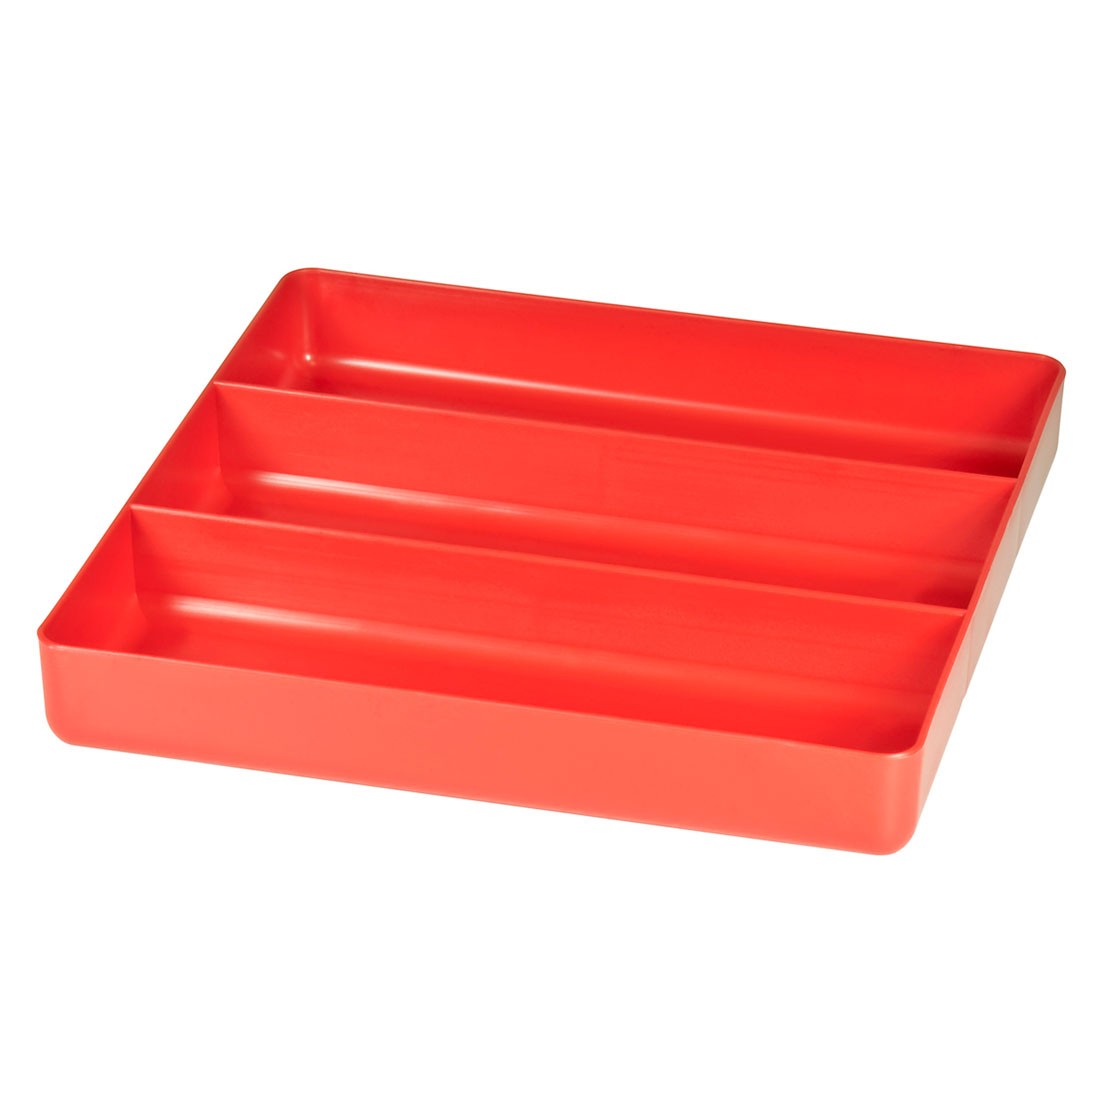 https://www.ernstmfg.com/resize/shared/images/product/5020_three-compartment-organizer-tray_red-1100_1.jpg?bw=1000&w=1000&bh=1000&h=1000